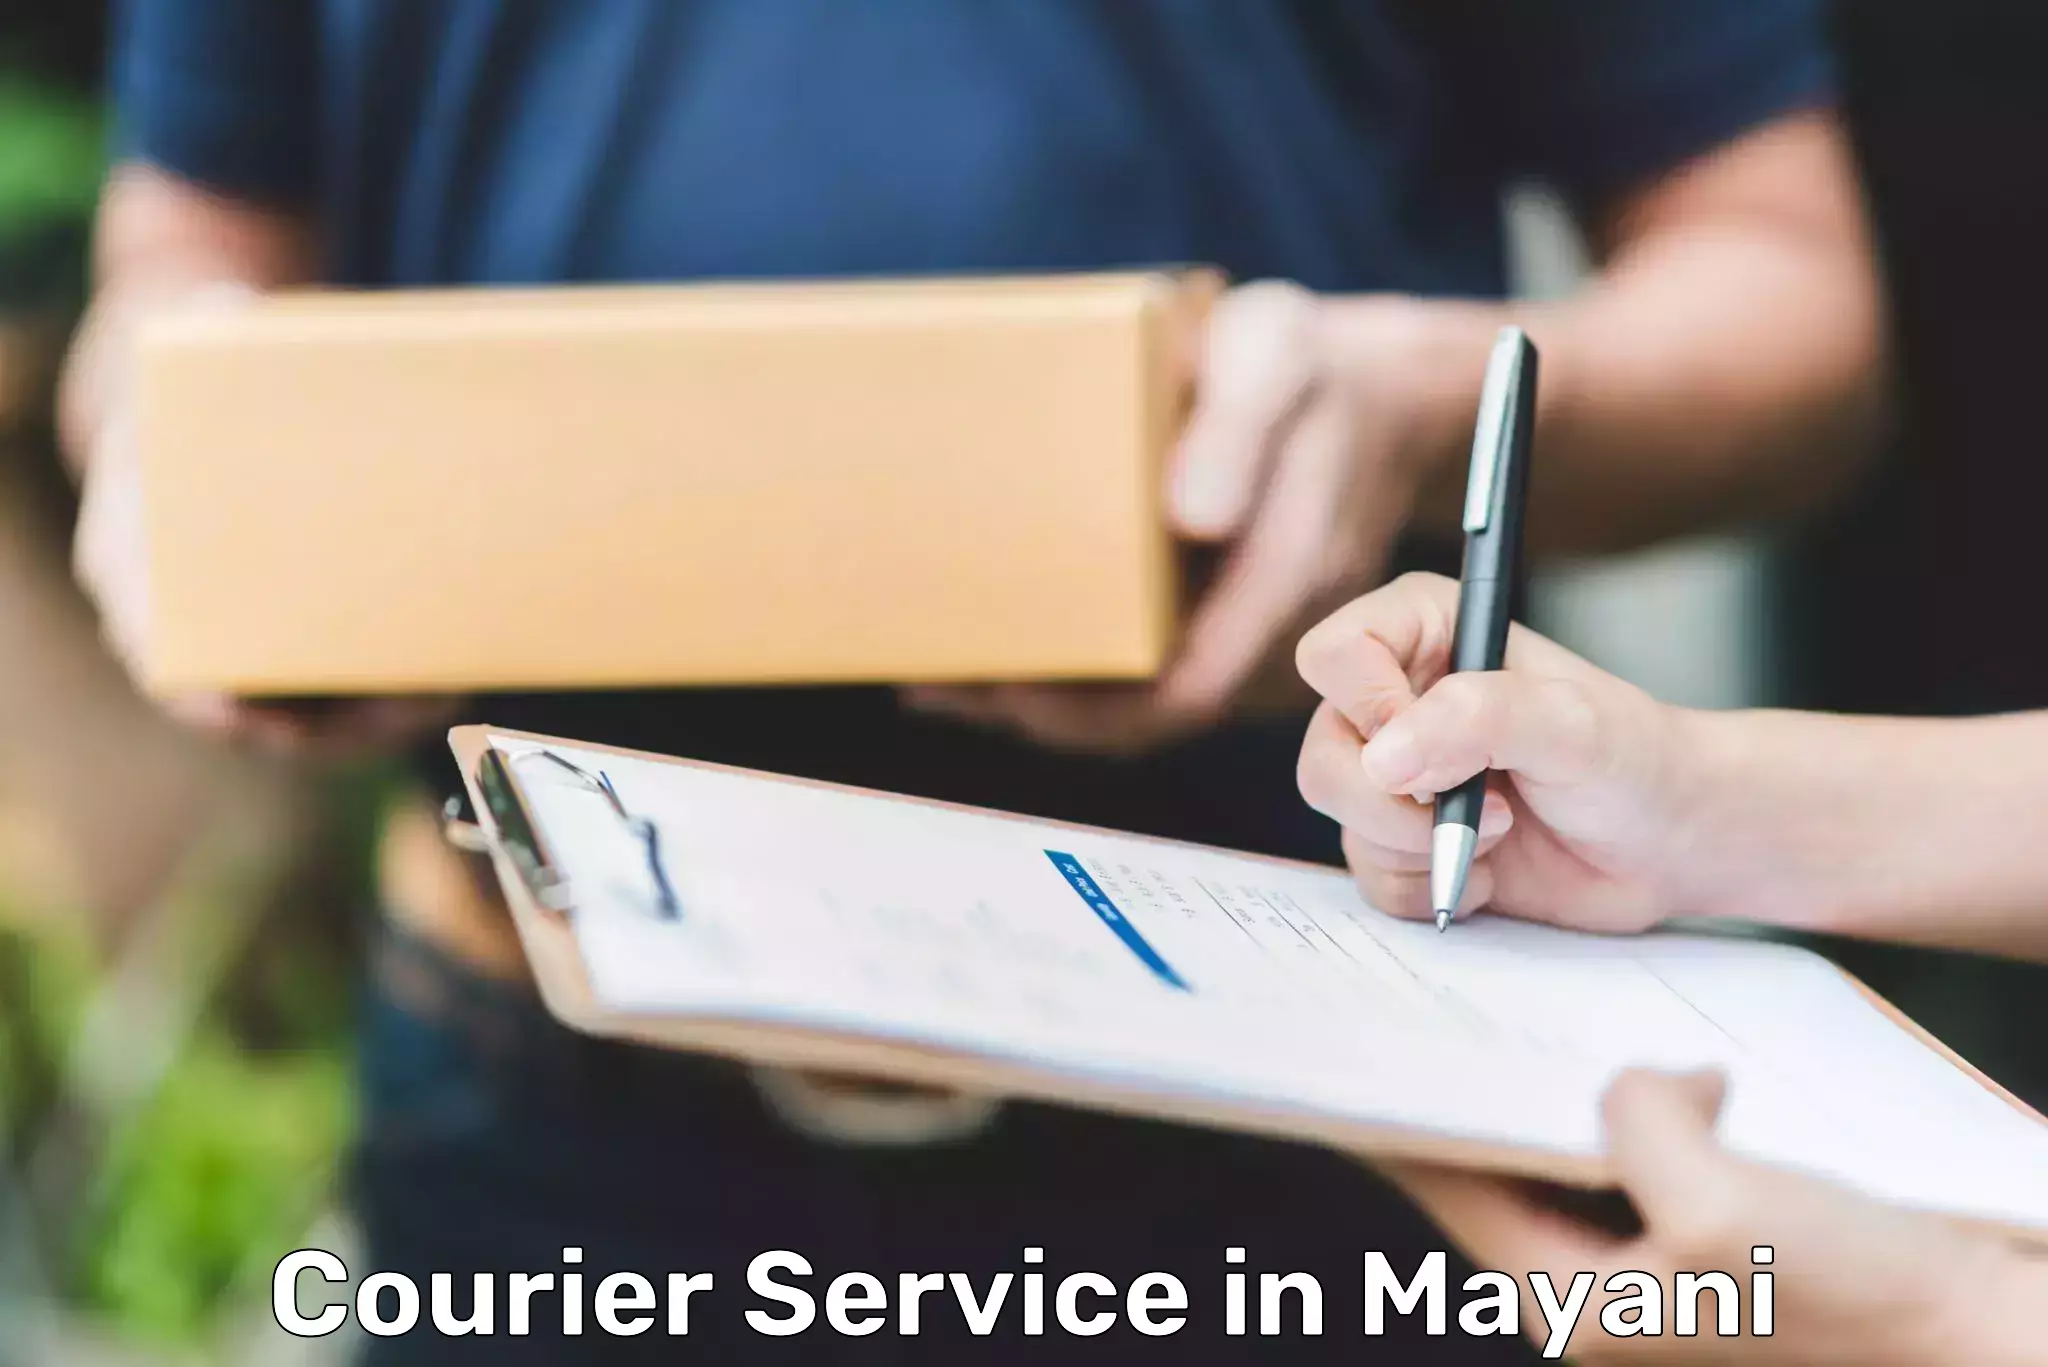 On-demand delivery in Mayani